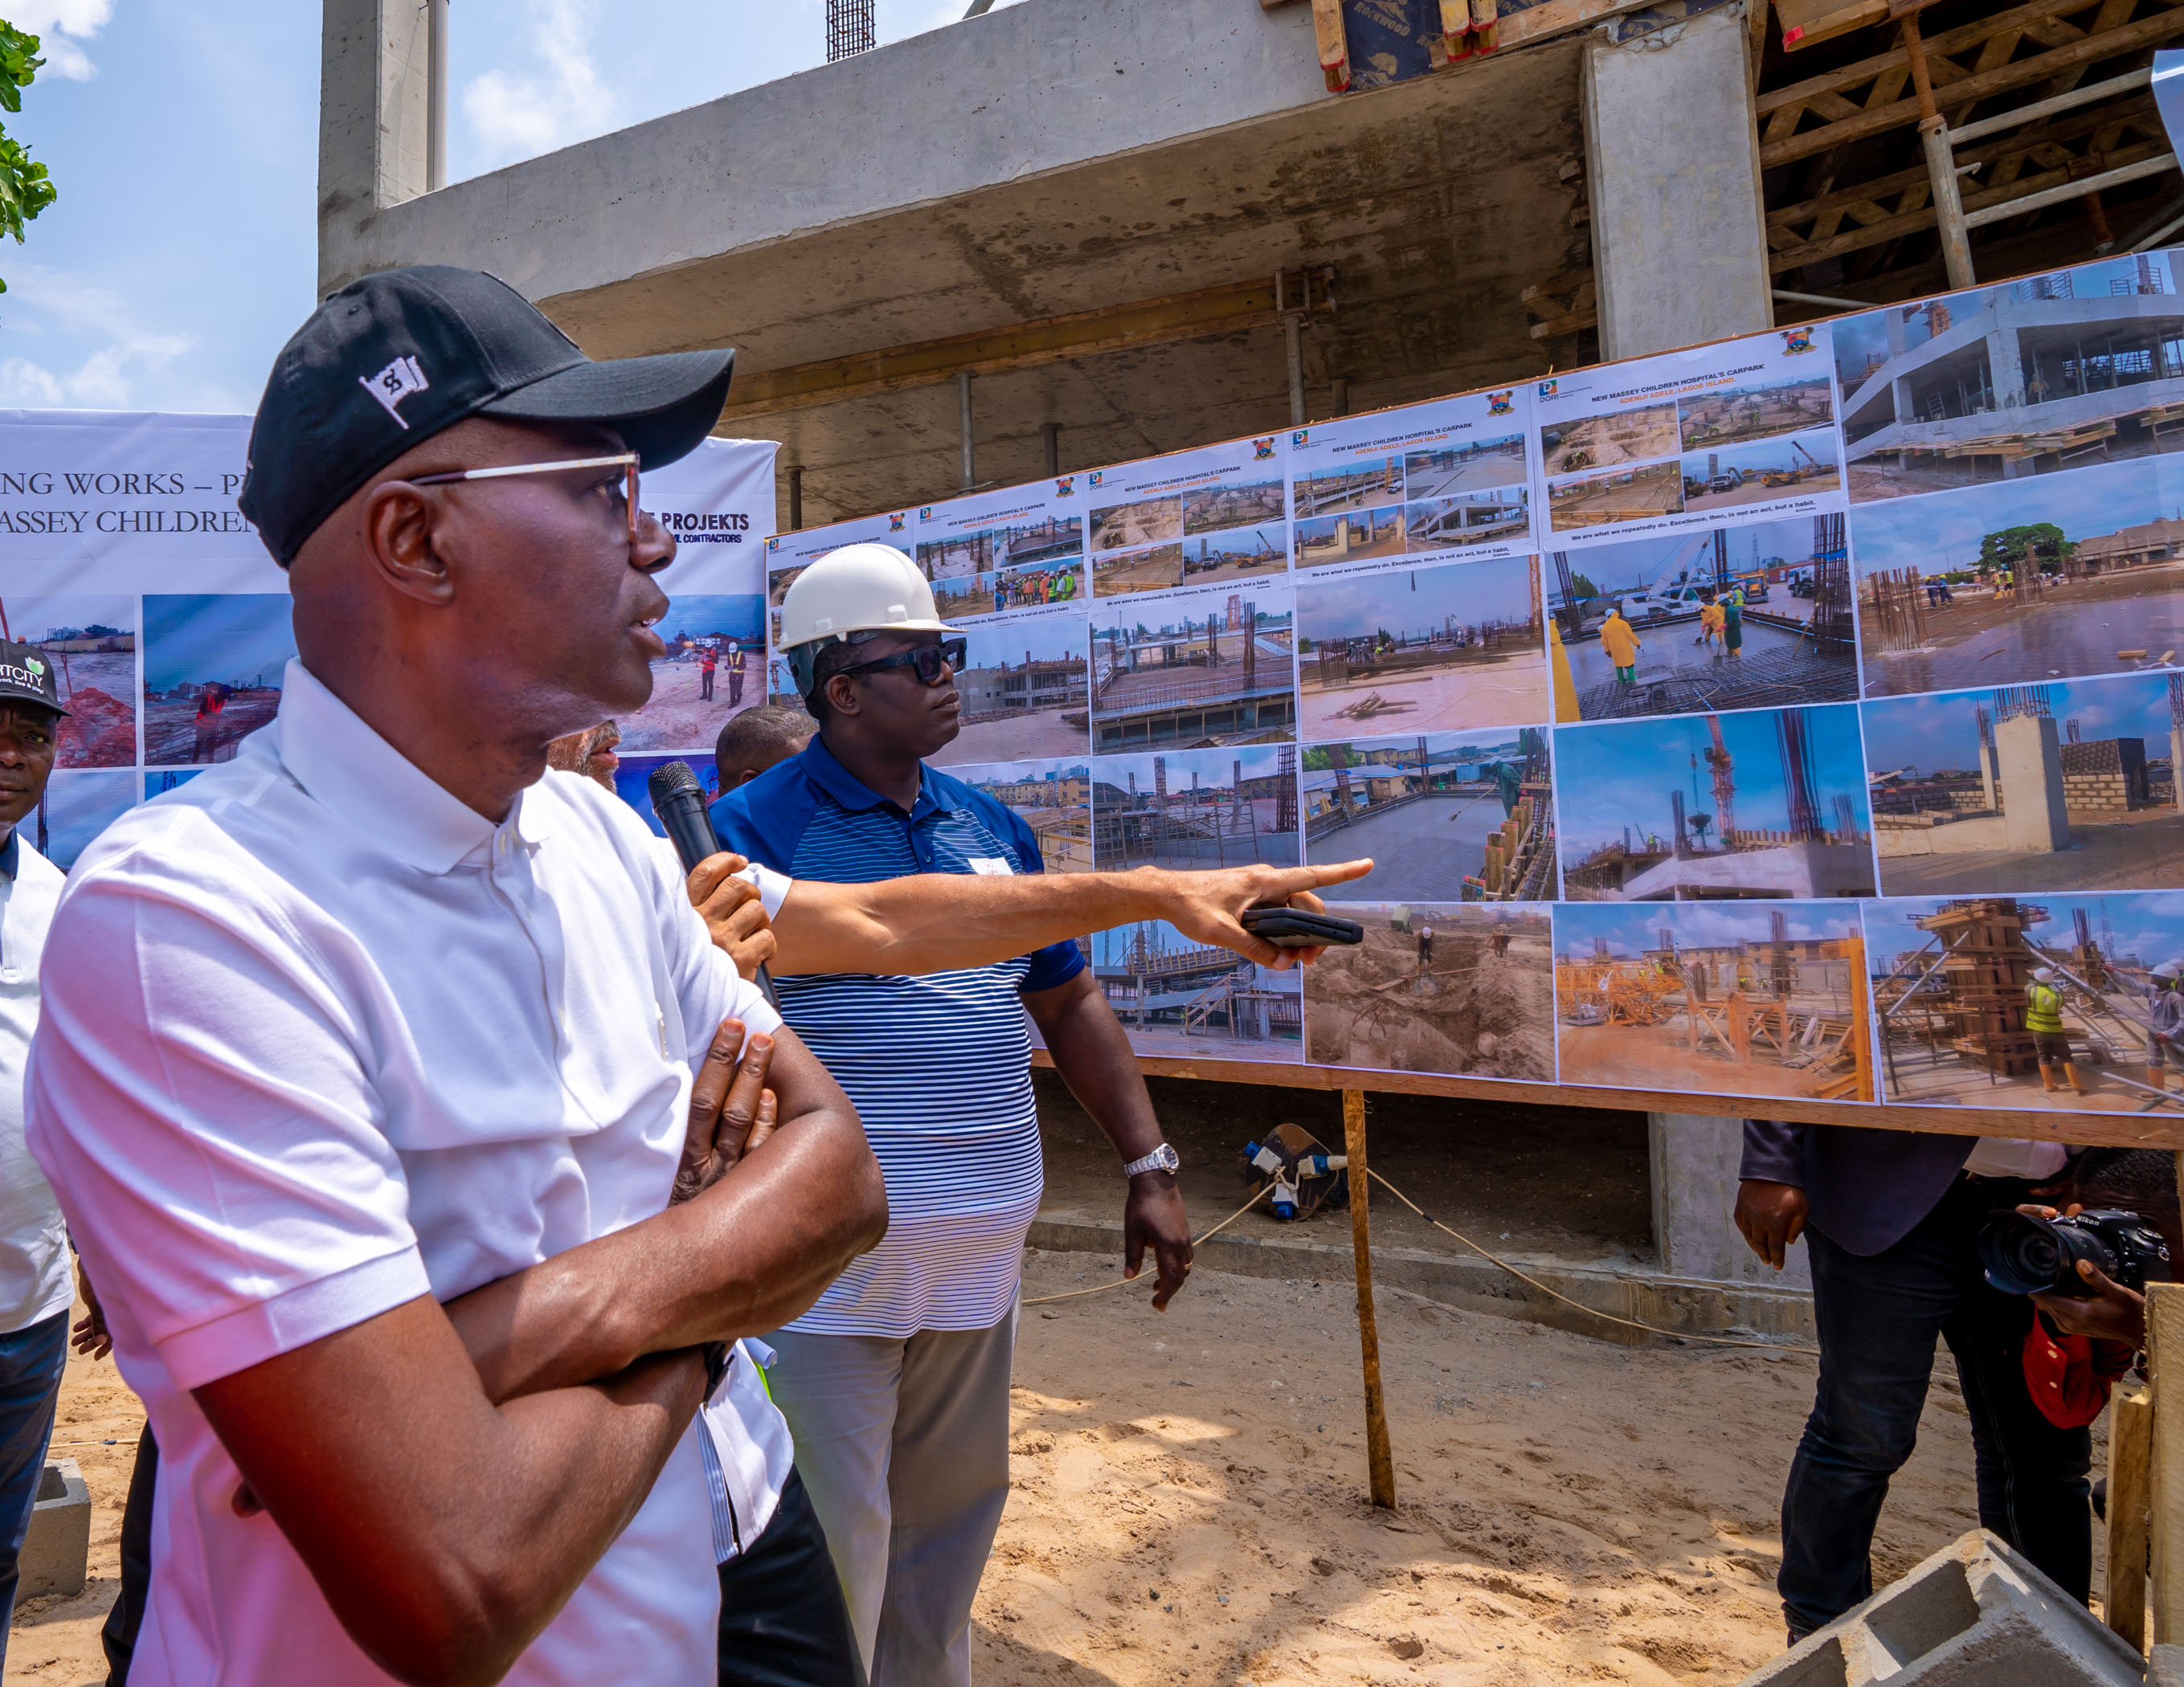 SANWO-OLU RECEIVES HOMECOMING TREATMENT, AS GOVERNOR INSPECTS INFRASTRUCTURE PROJECTS ON LAGOS ISLAND